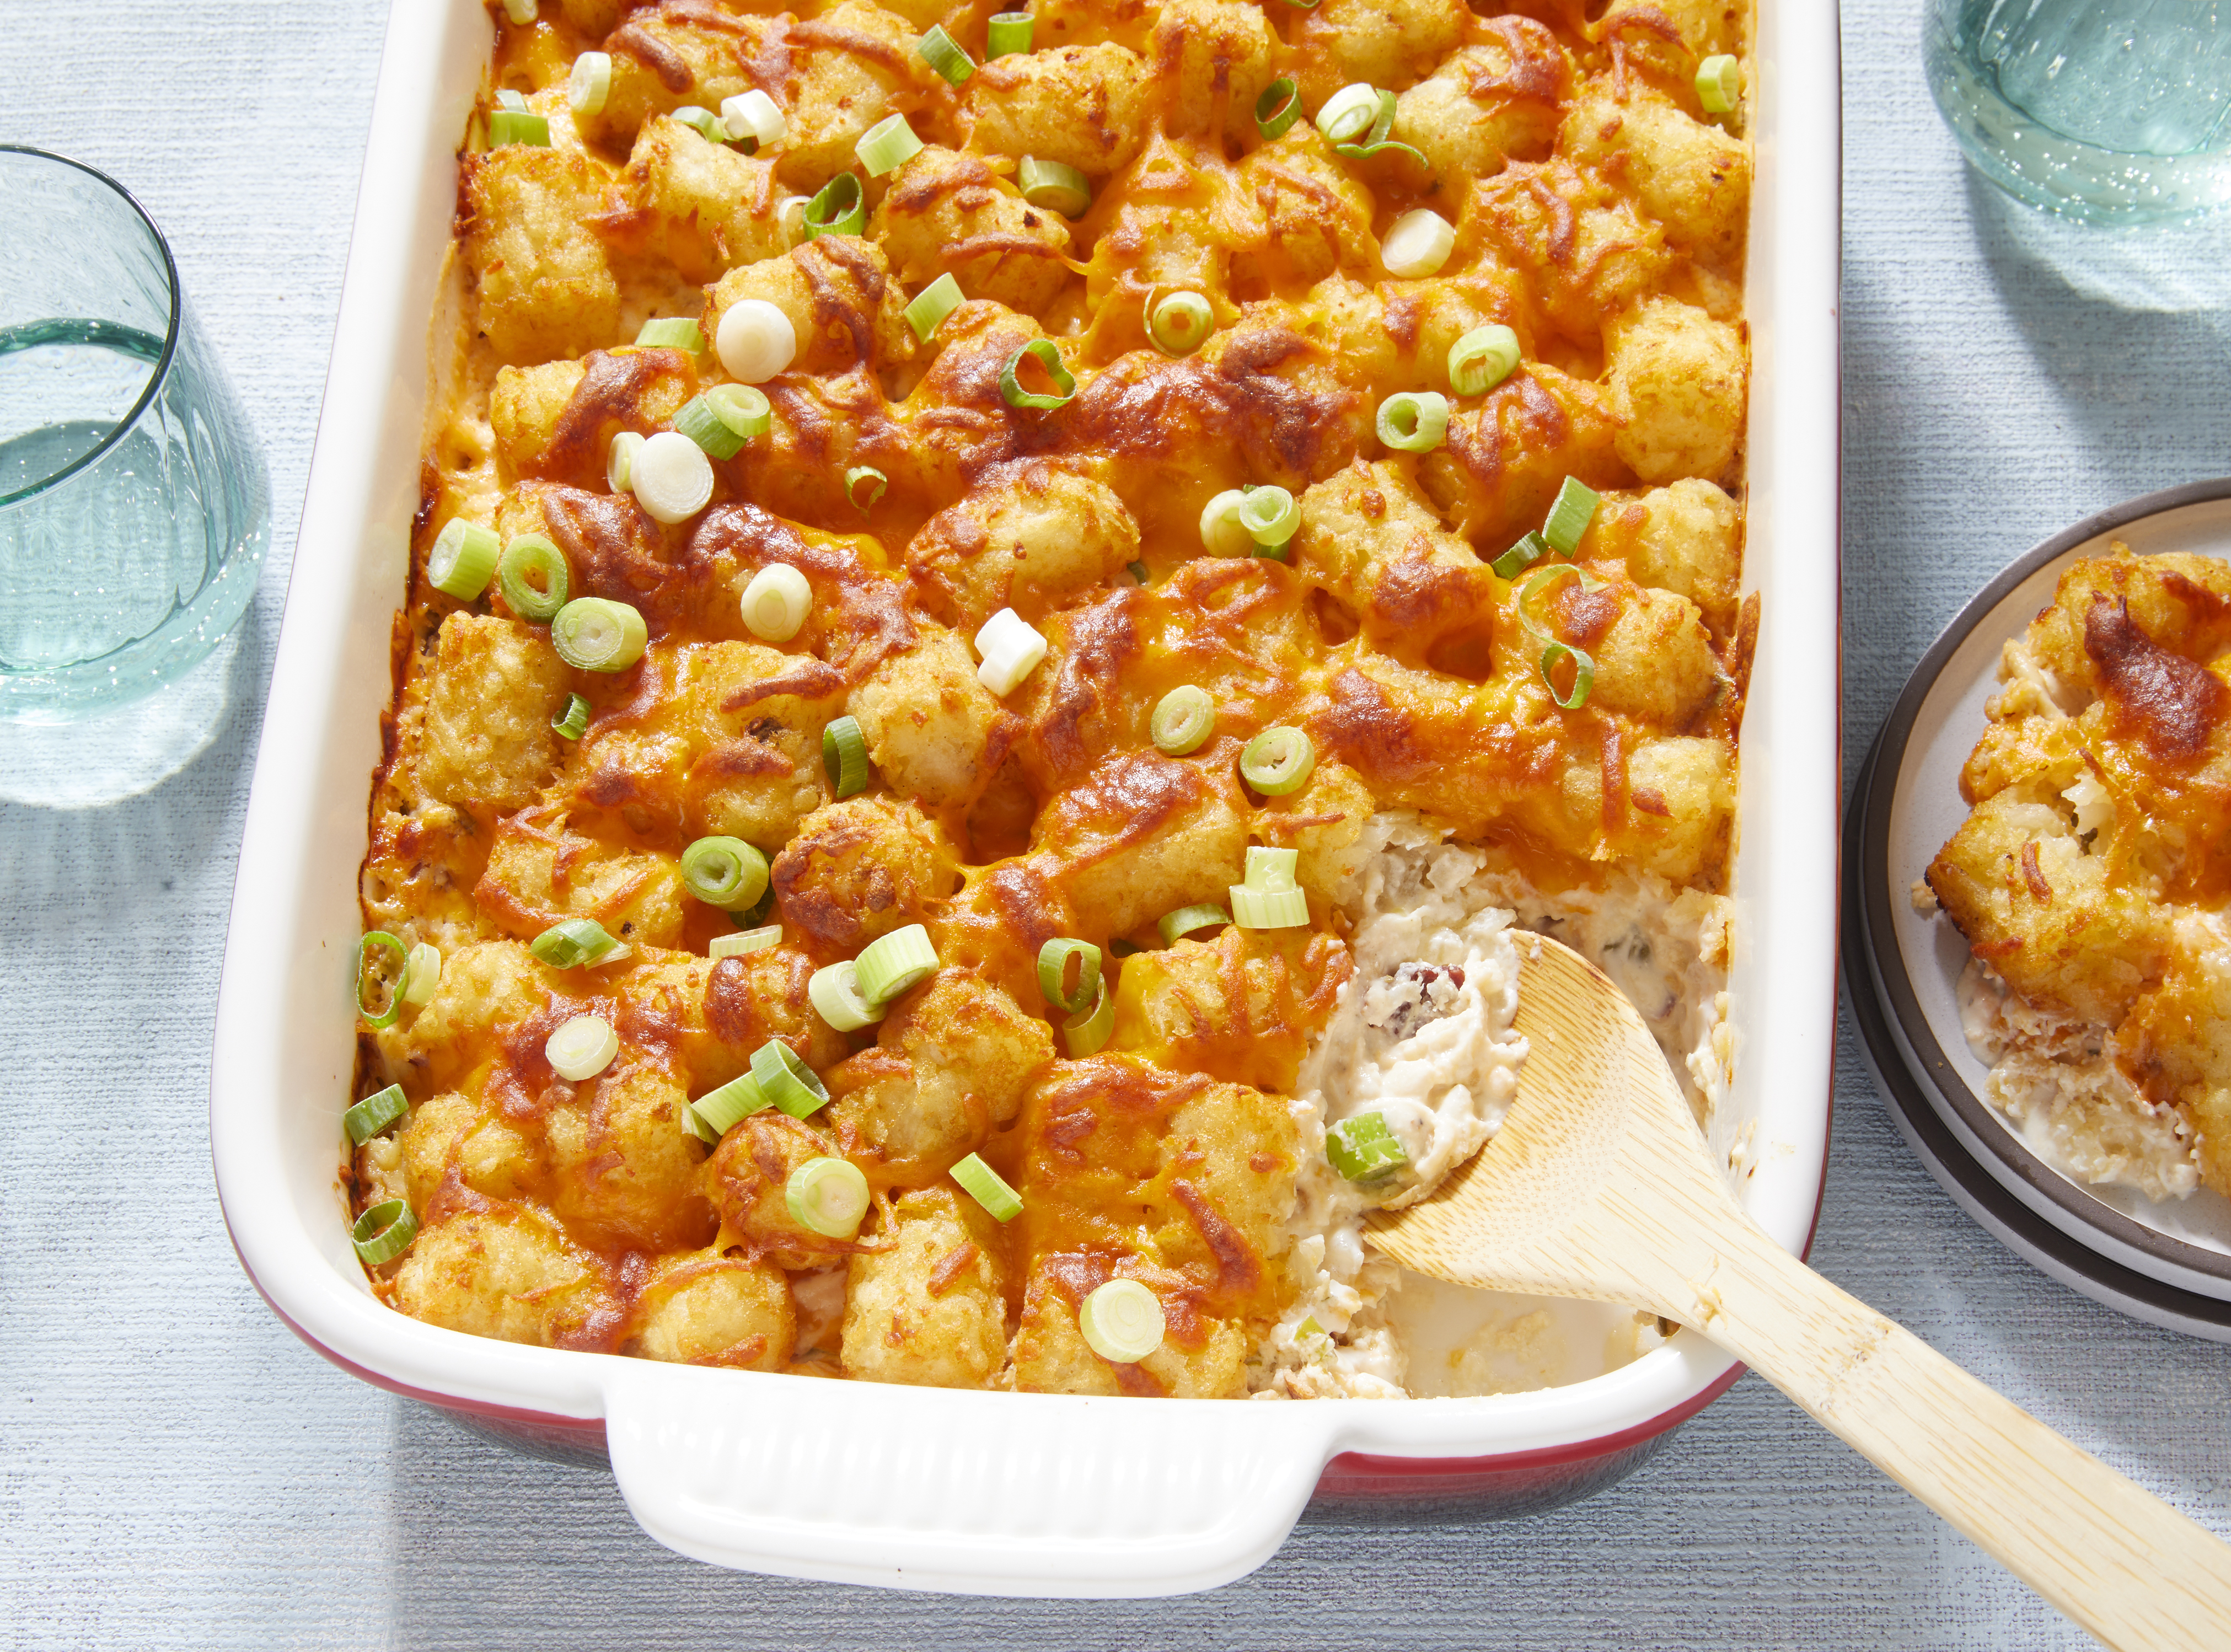 Slow Cooker Tater Tot Casserole - Damn Delicious